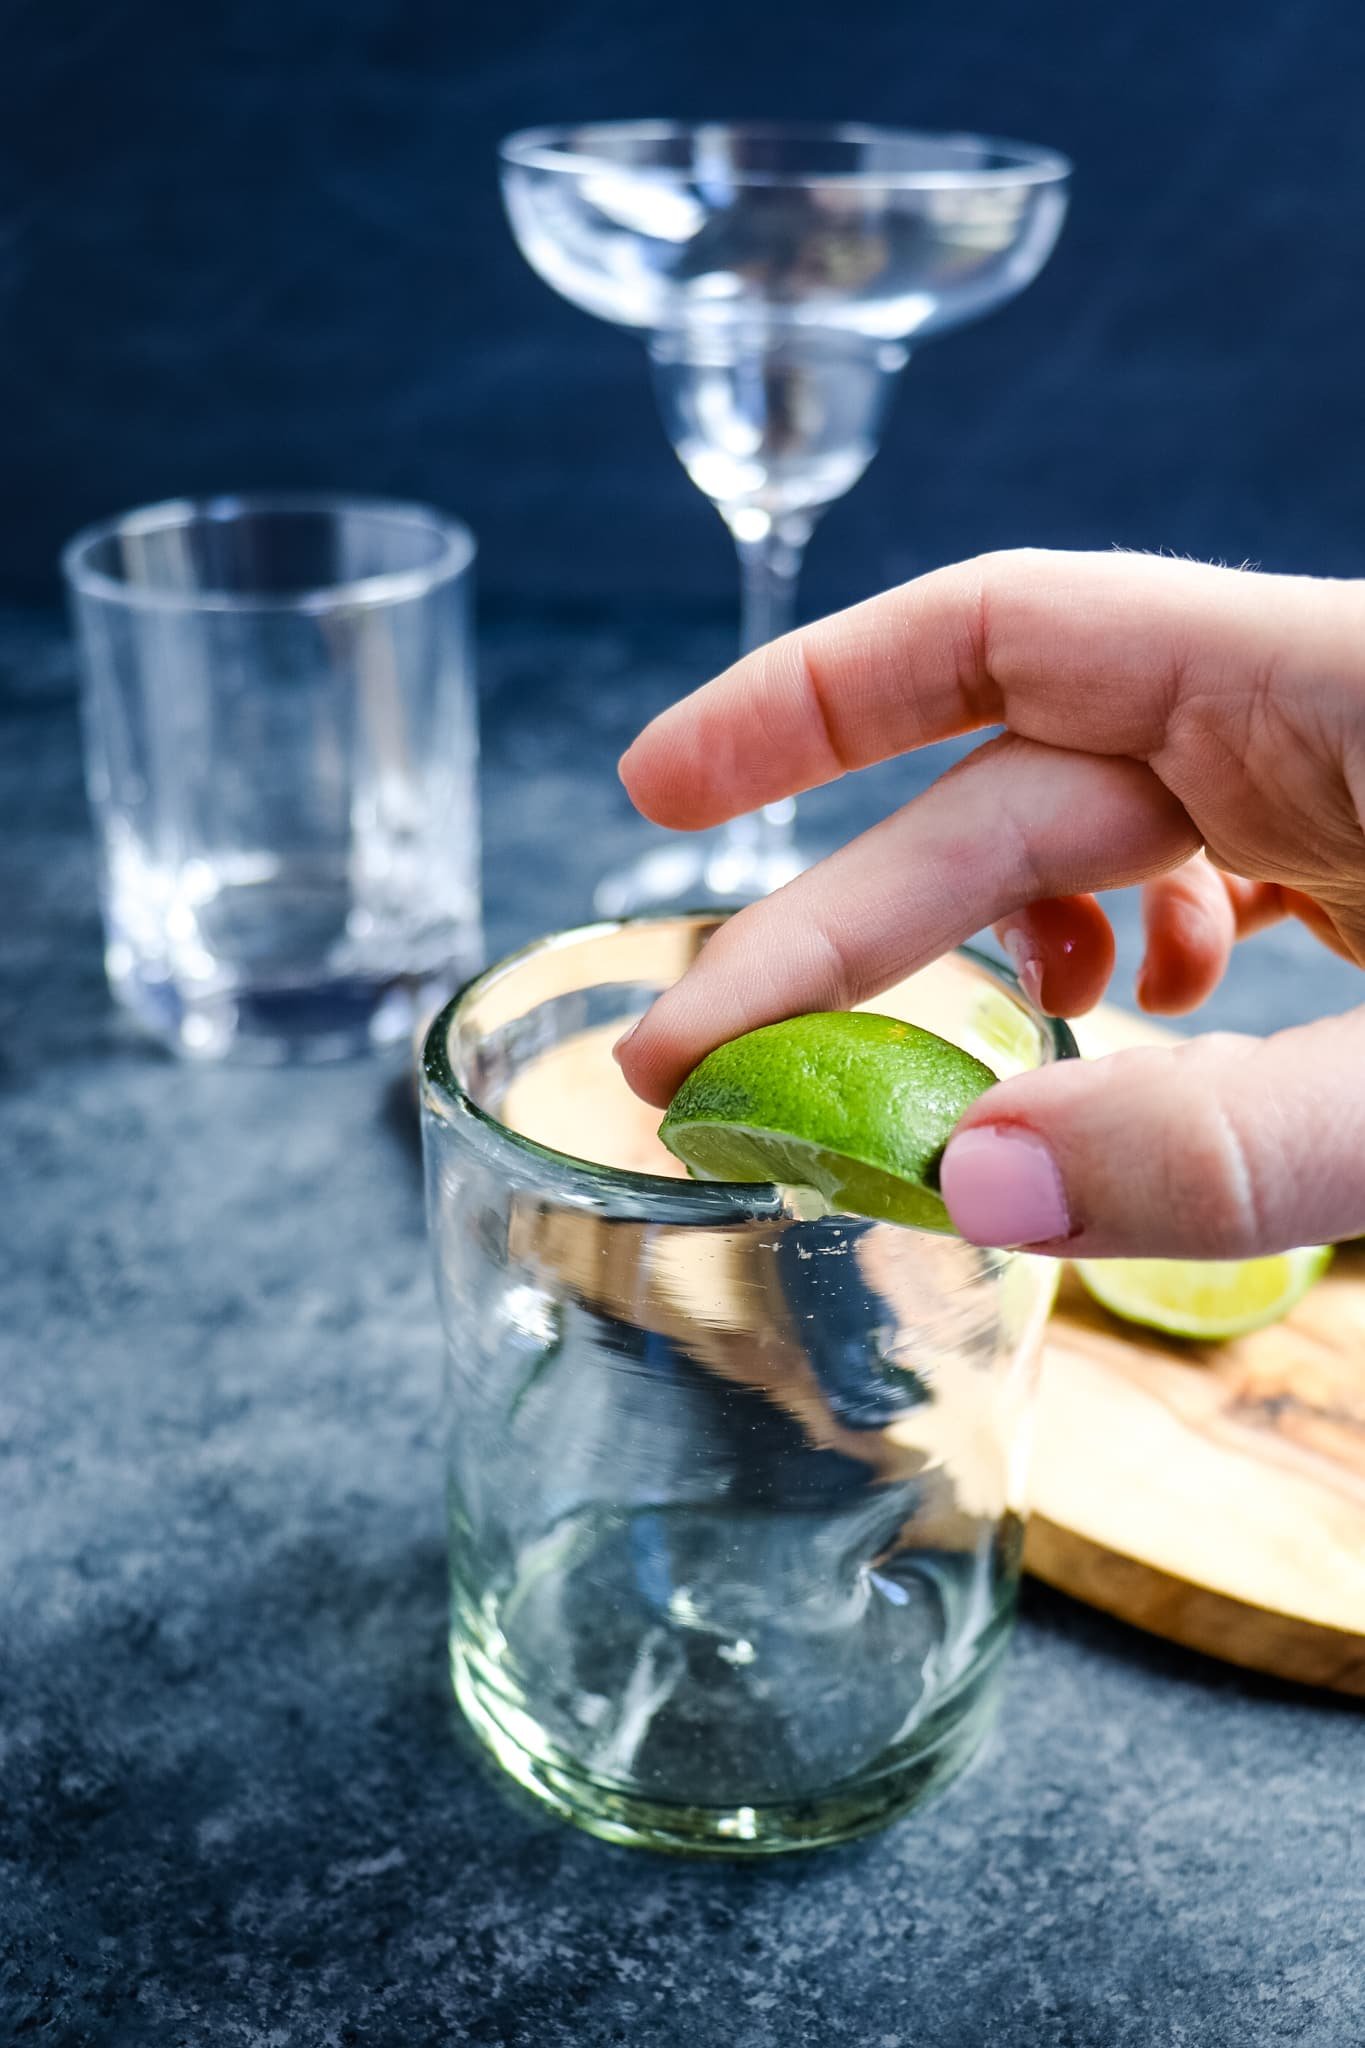 Running a lime around the edge of a glass to salt the rim.